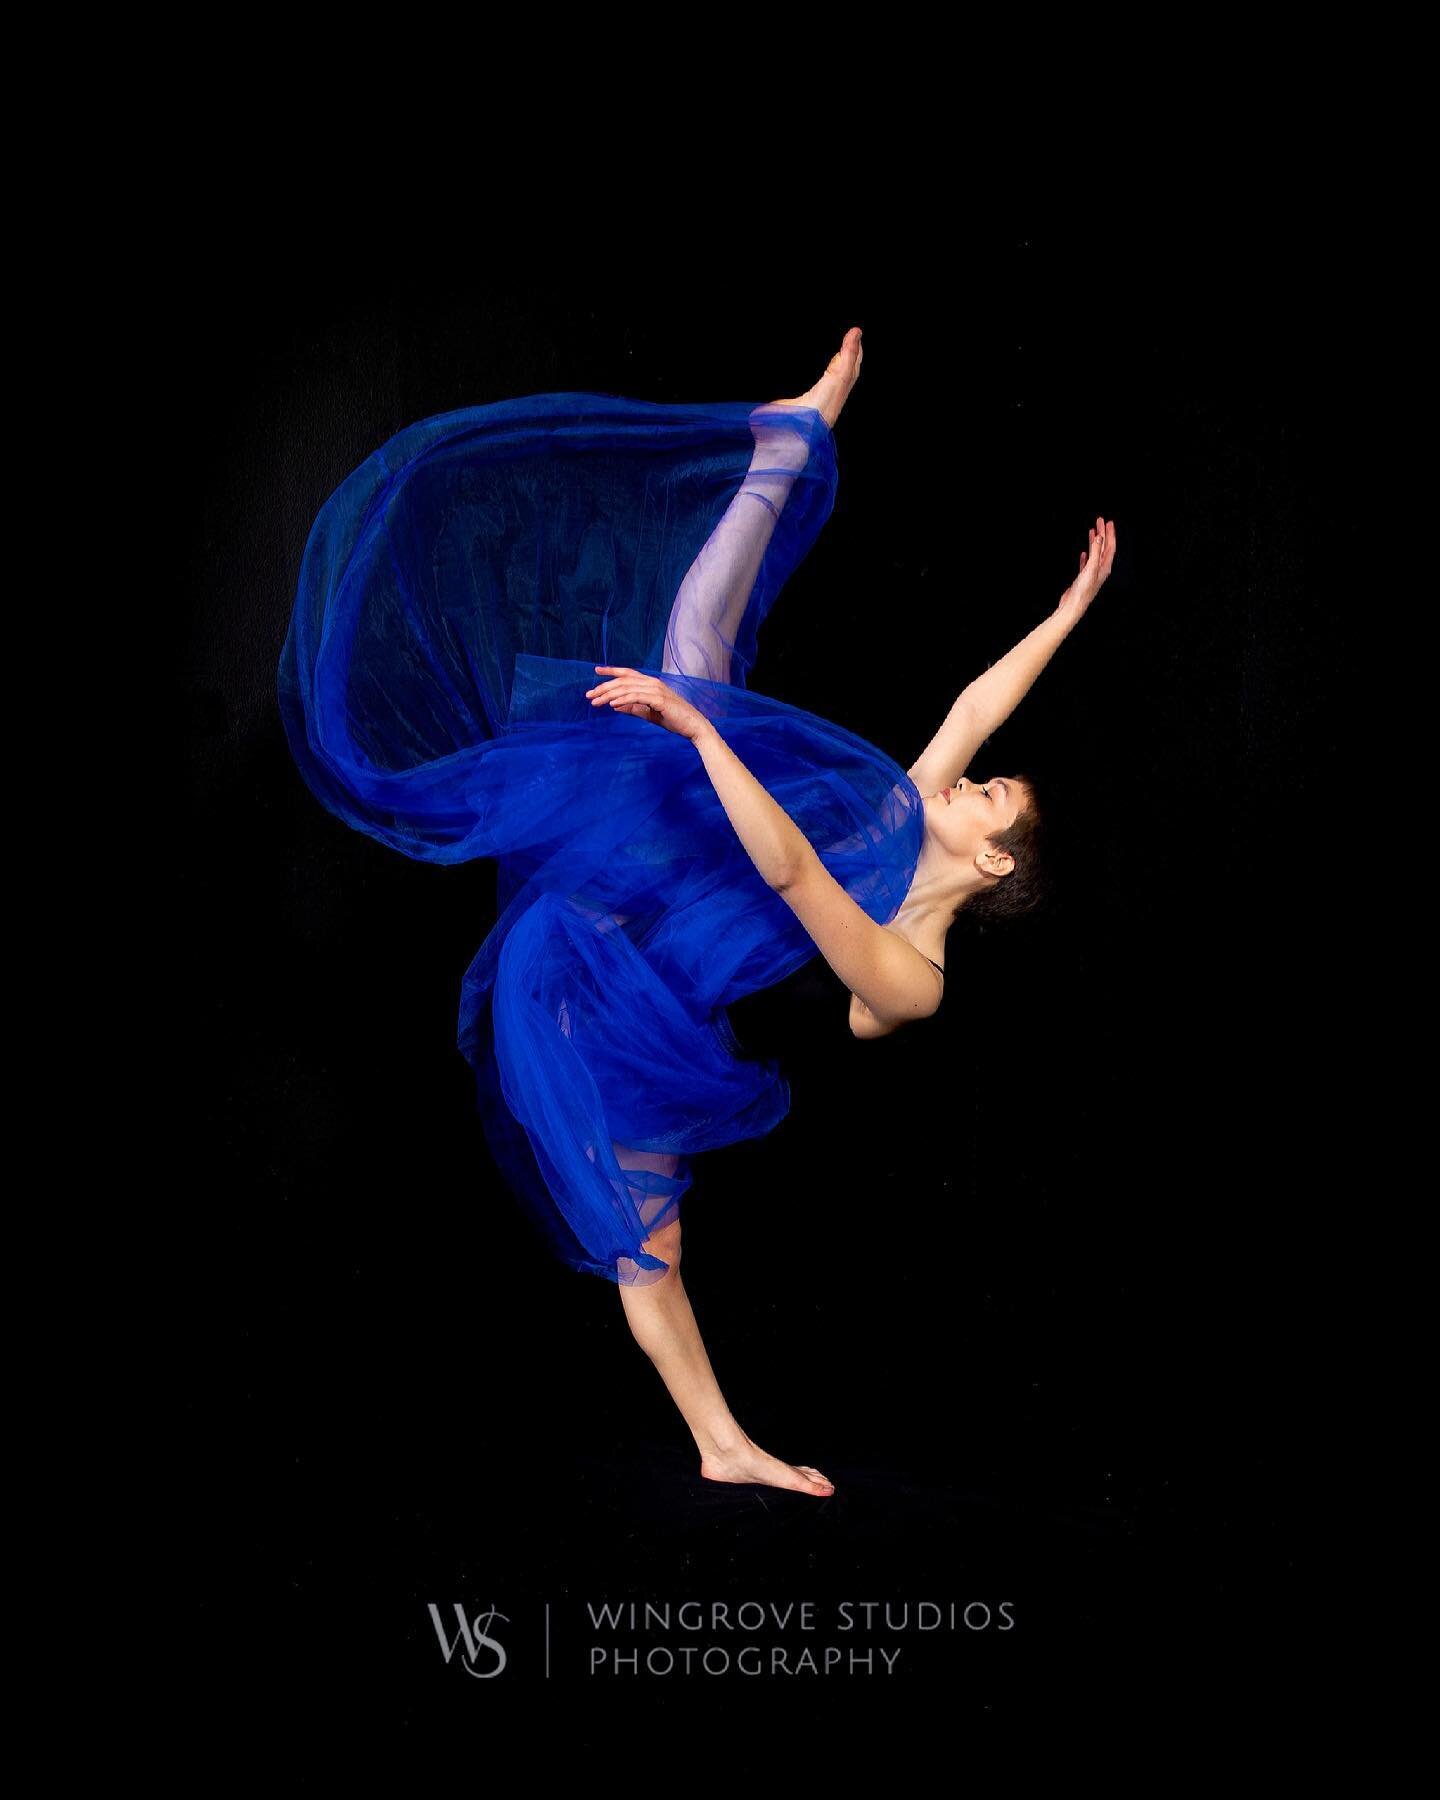 Blue Monday with @visionary_dancer Heather. 

@wingrove.studios.photography 

#dancephotography #balletphotography #danceportrait #sandiegophotographer